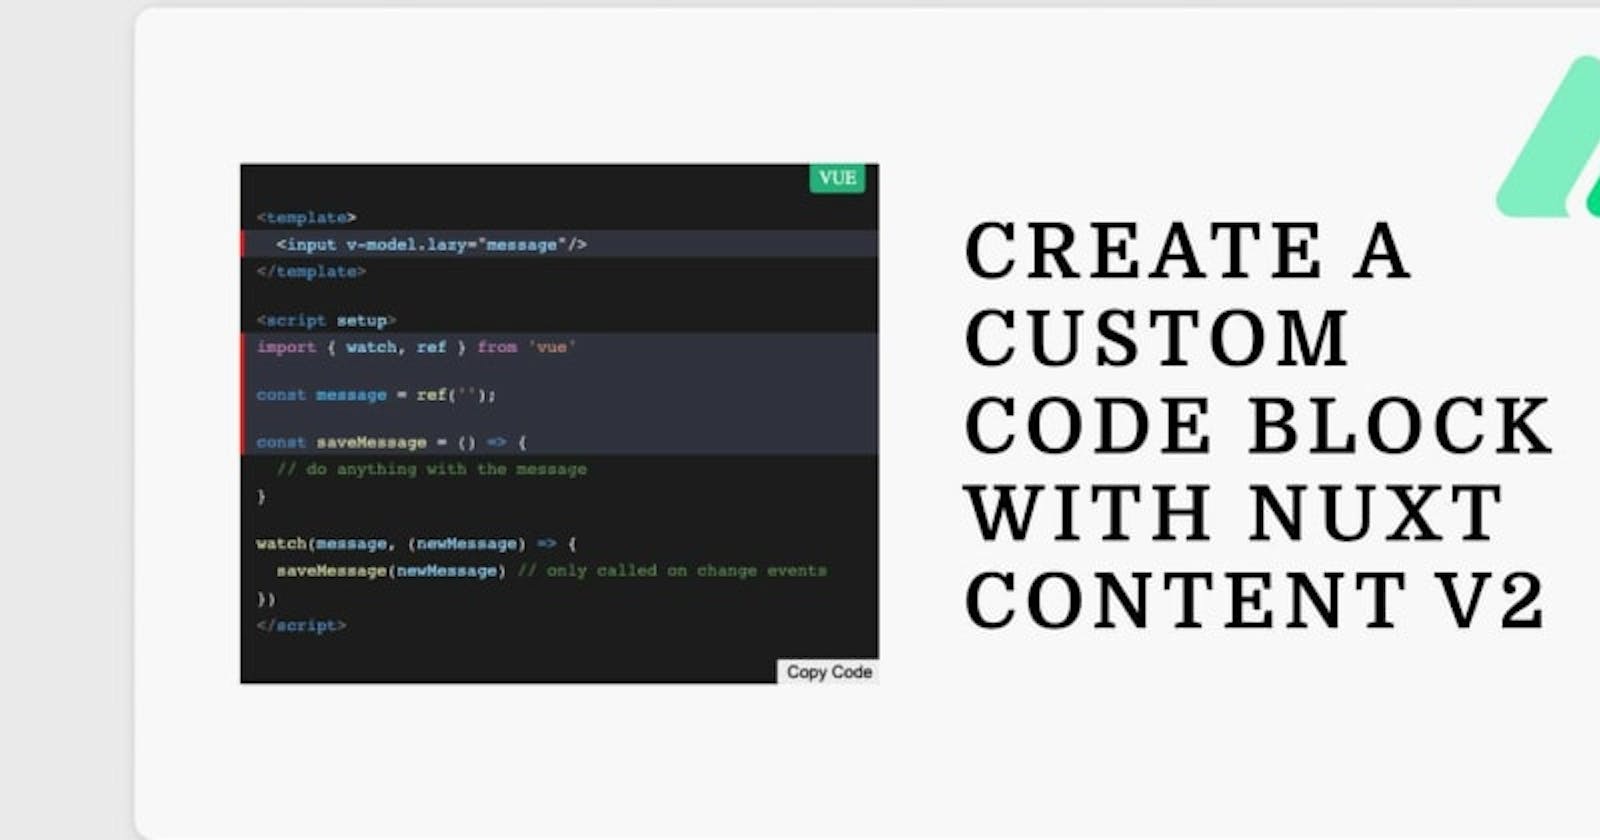 How to Create a Custom Code Block With Nuxt Content v2